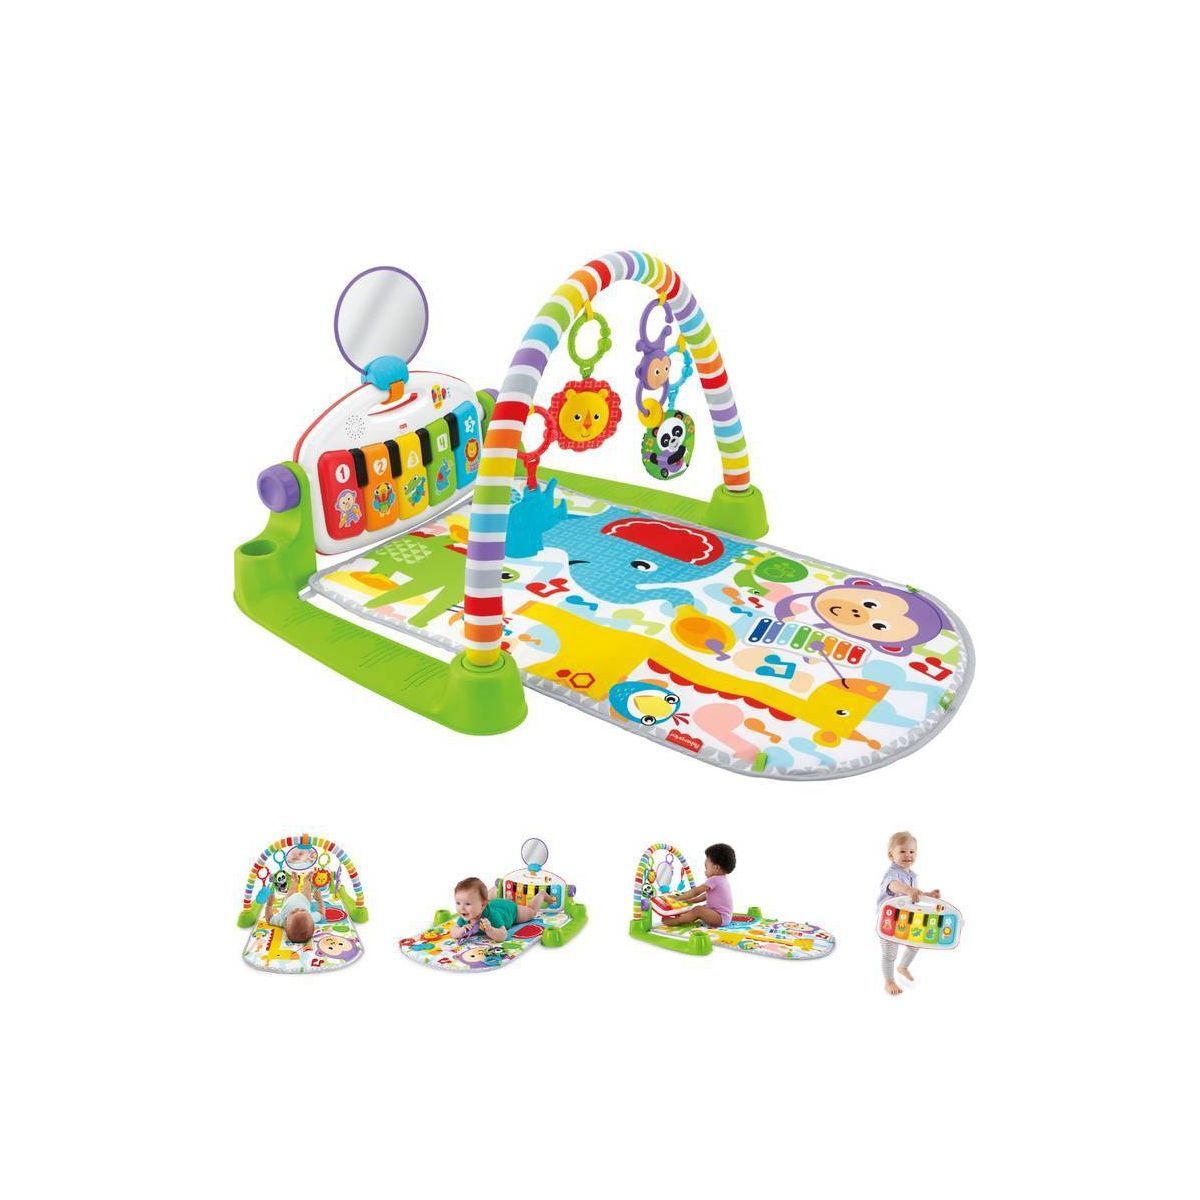 Fisher-Price Deluxe Kick & Play Piano Gym | Target